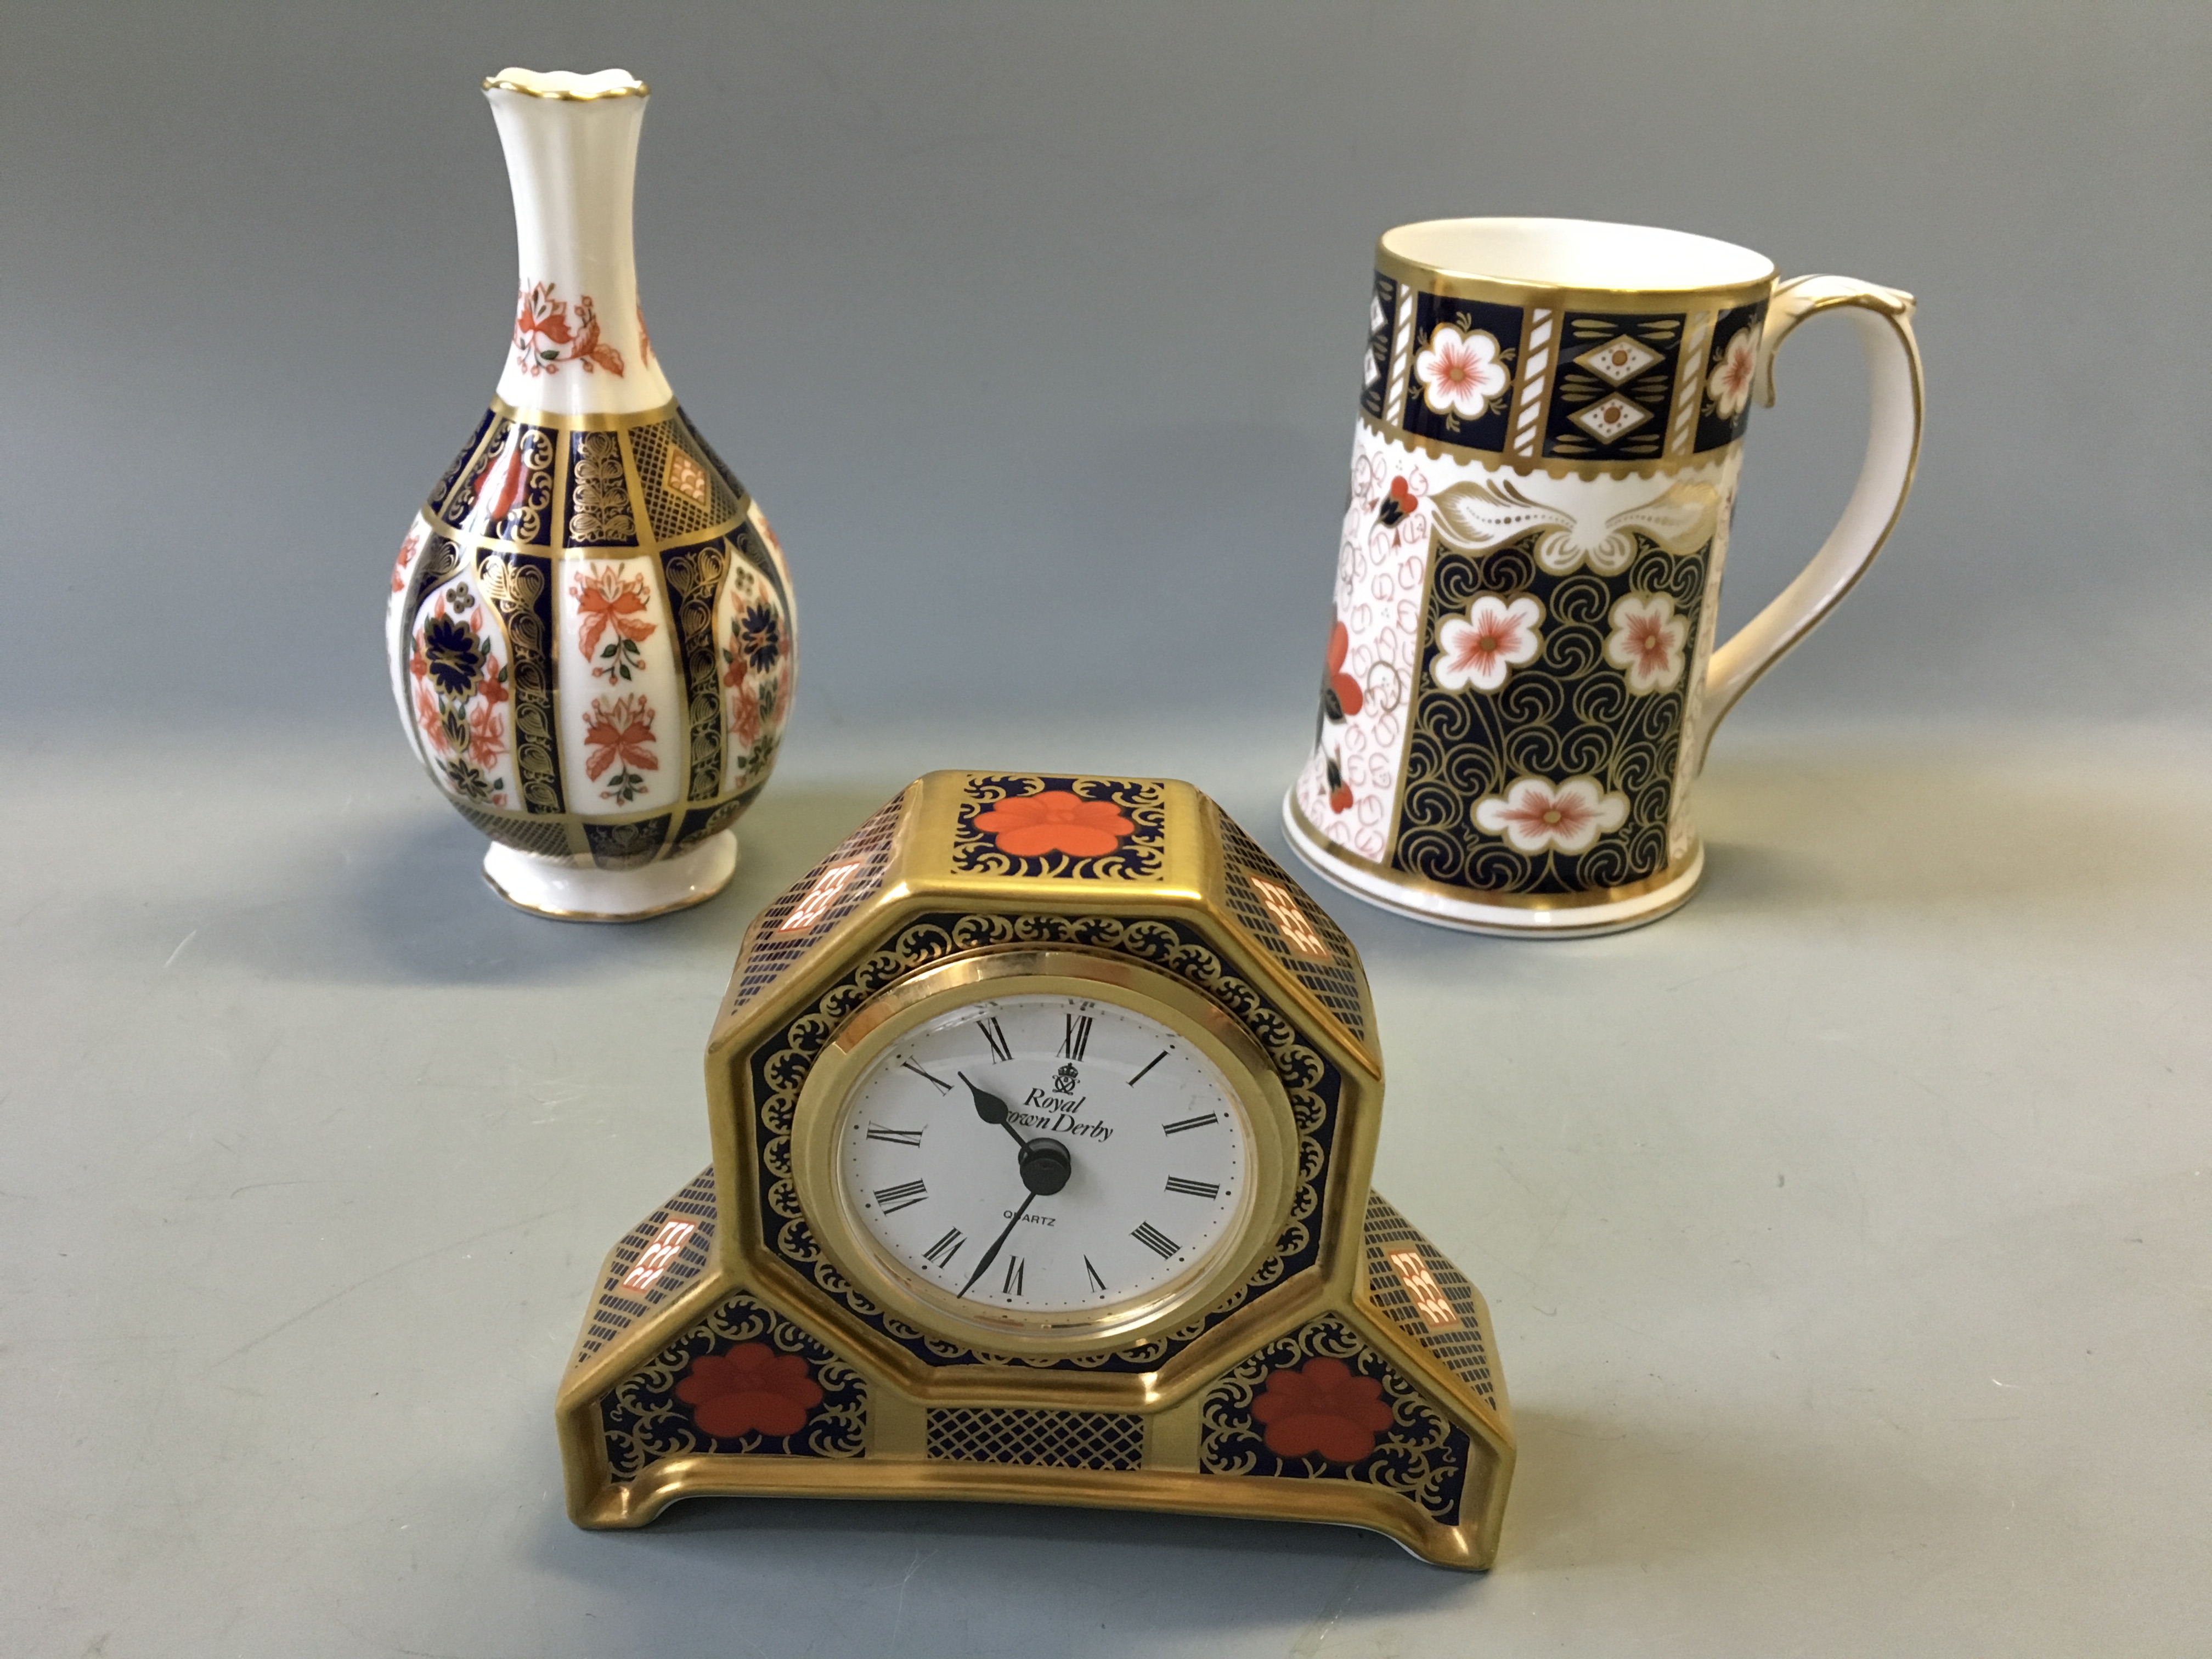 A Royal Crown Derby Old Imari mantel clock and orchid vase, with a Traditional Imari tankard.